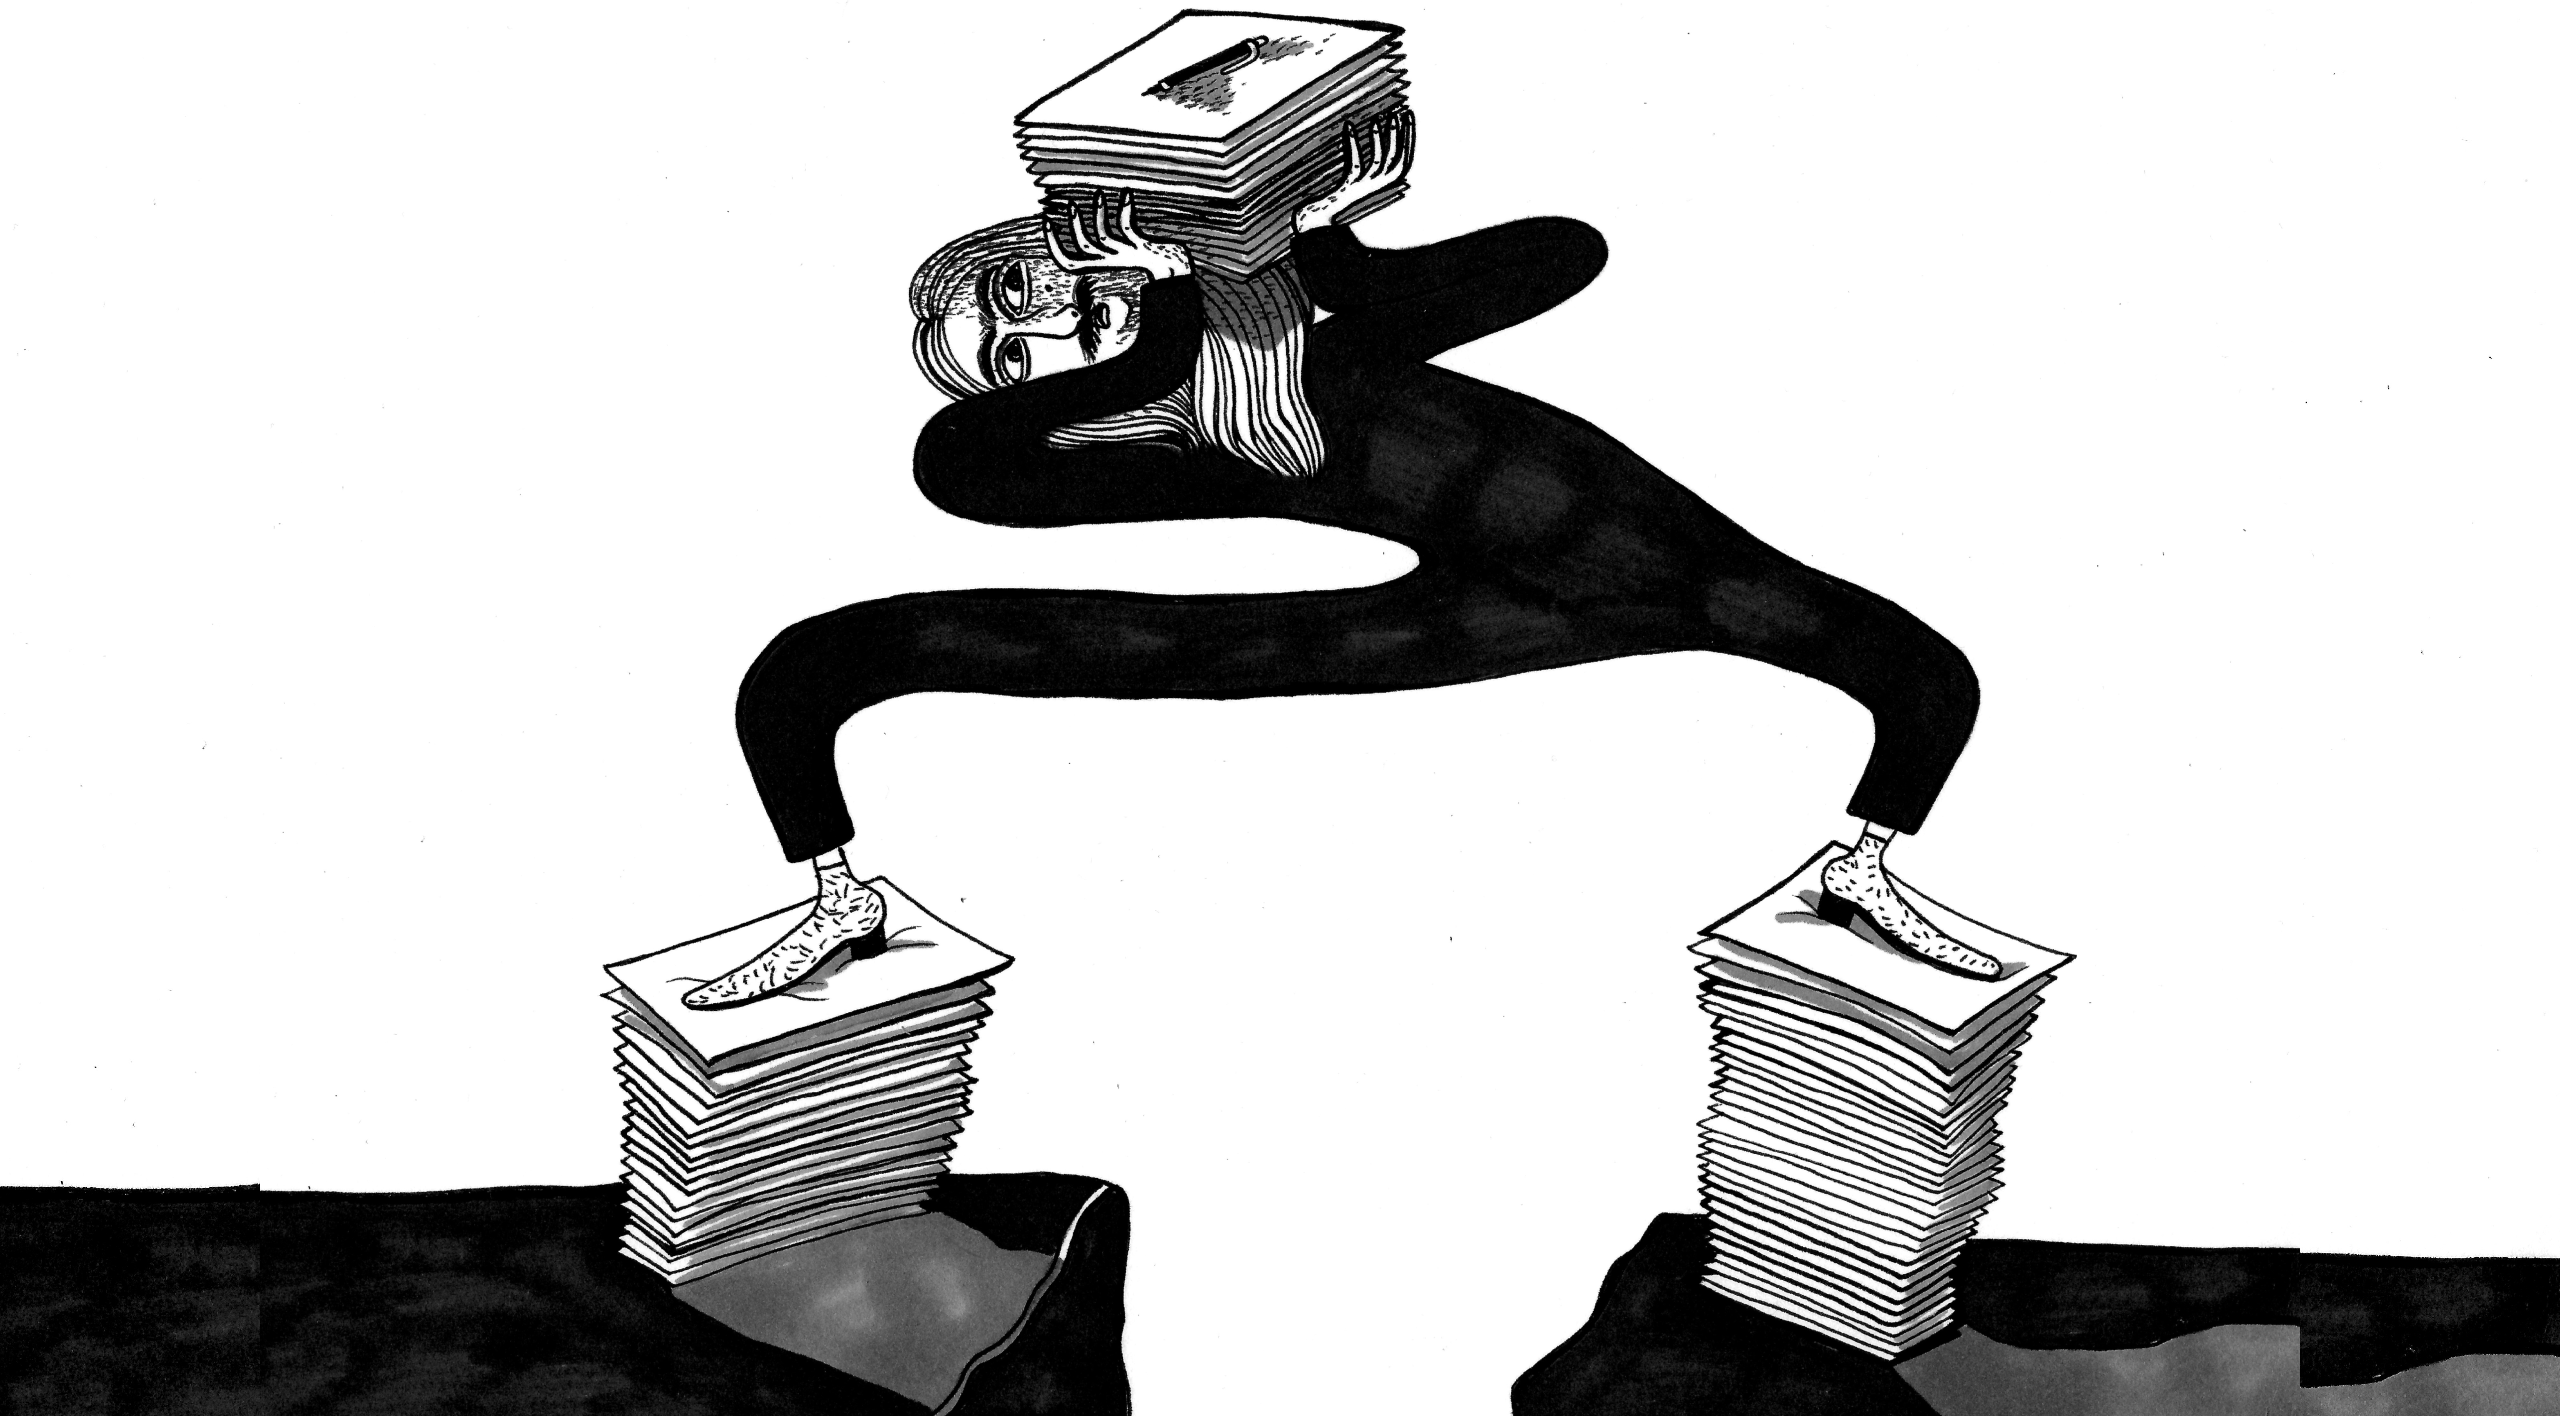 The illustration by Moshtari Hilal shows a person carrying lots of papers on her back, while standing on piles of paper with both feet.